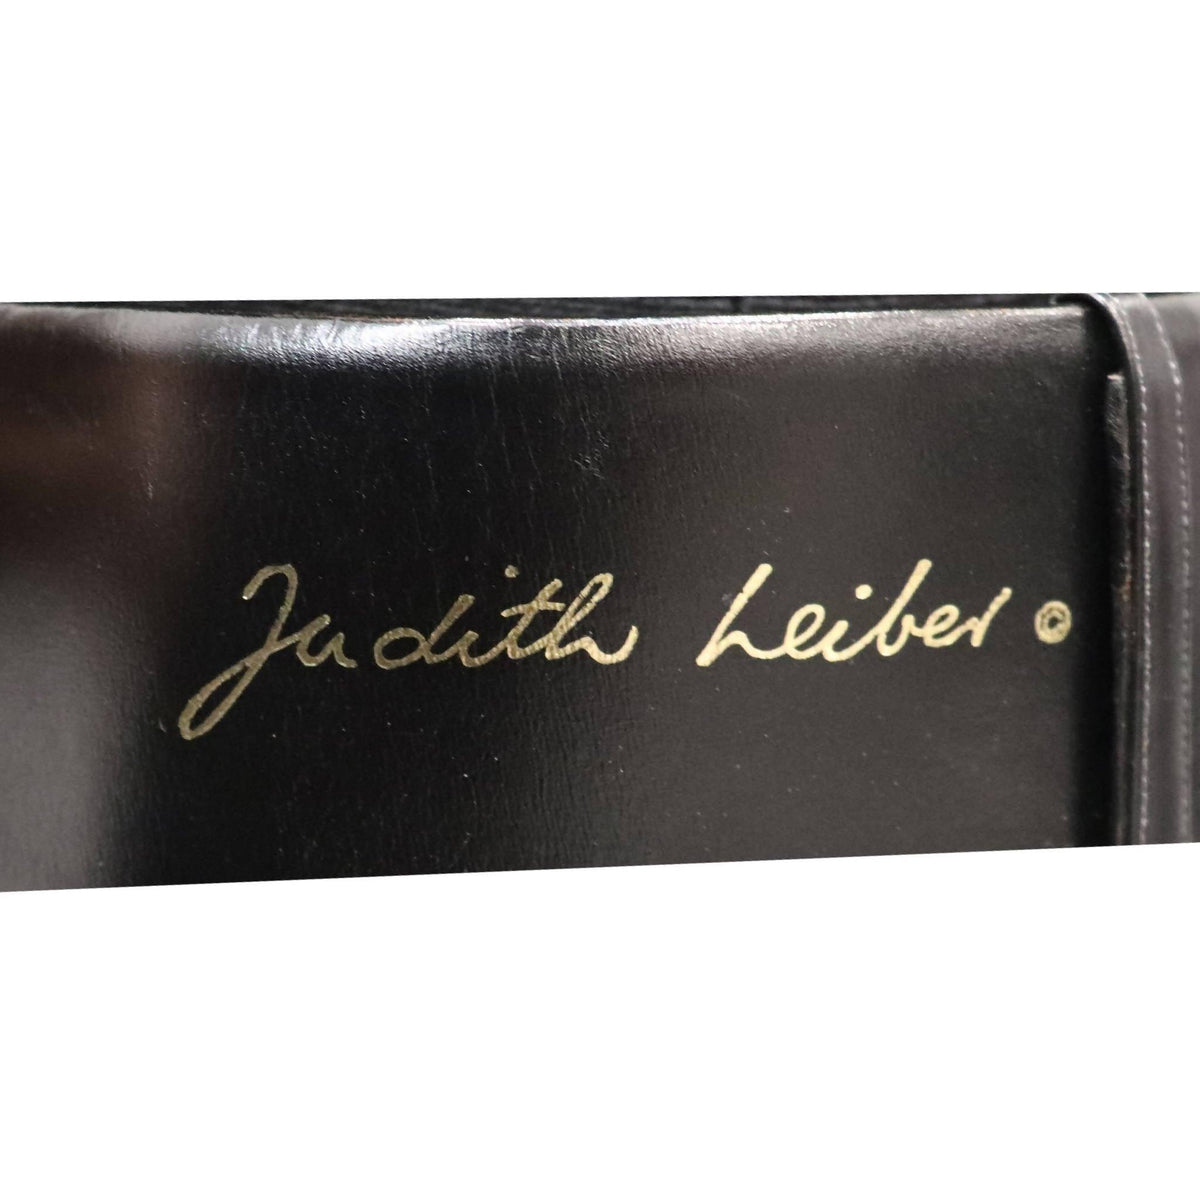 Pre-Owned JUDITH LEIBER Black Leather Belt with Gold Rectangle Buckle - theREMODA